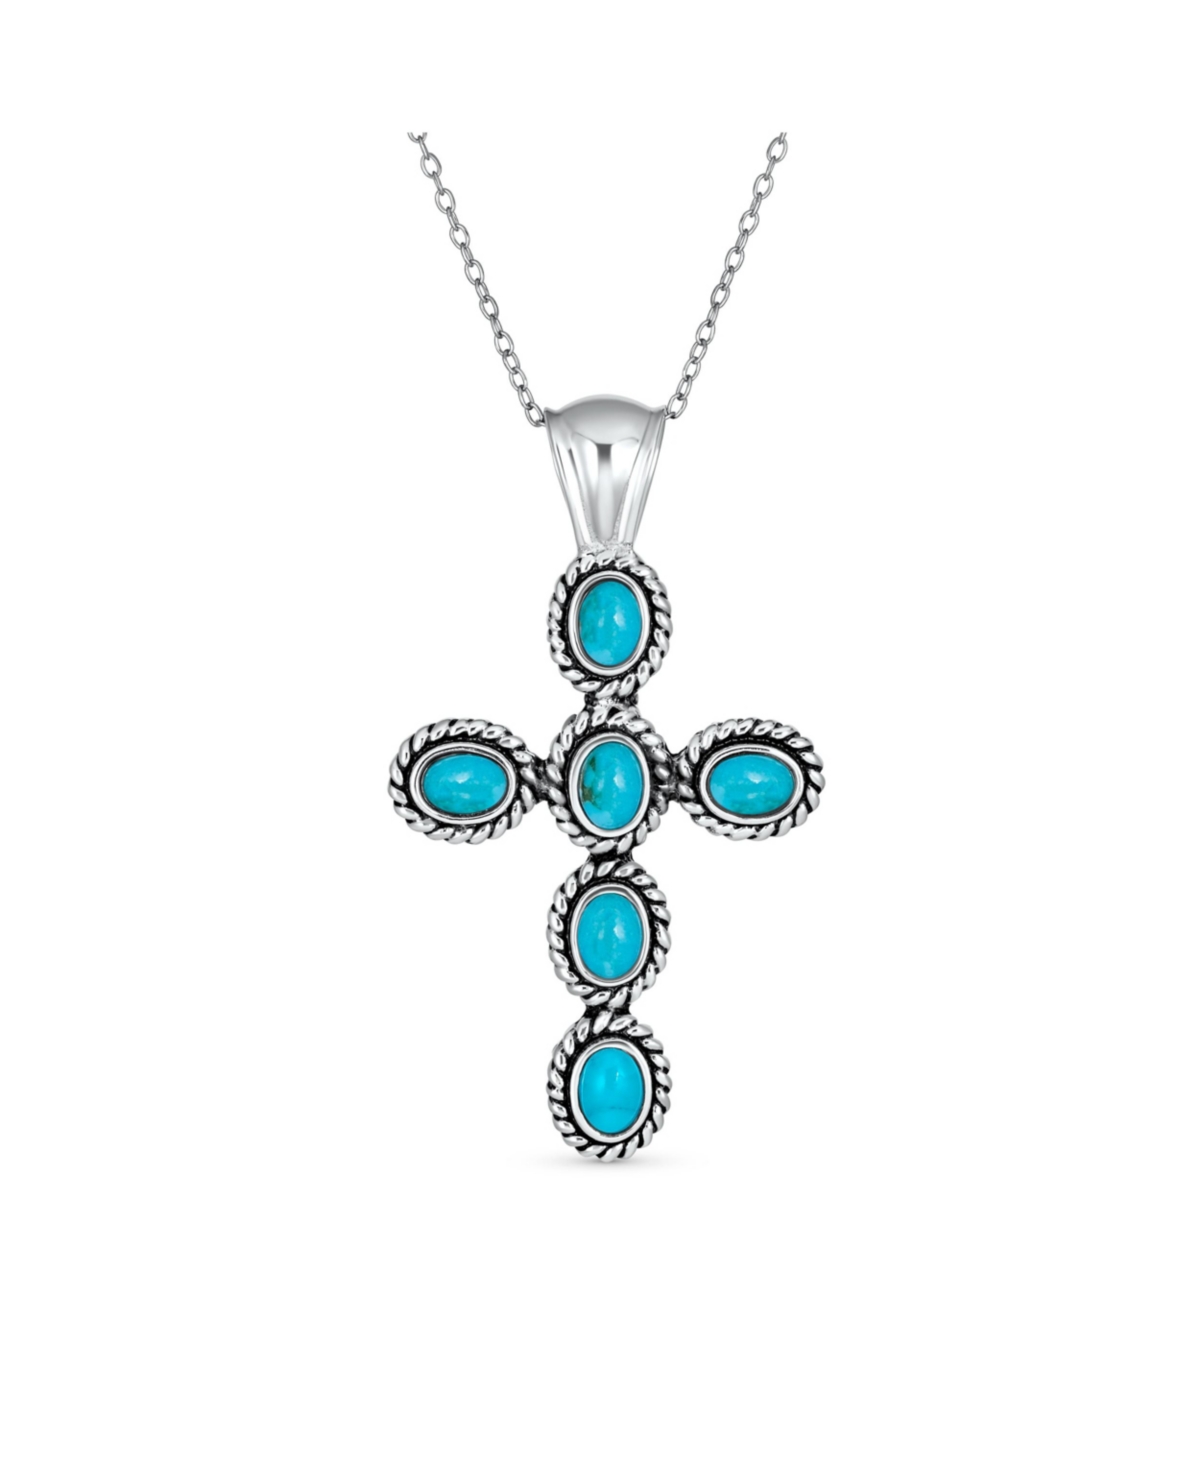 South Western Style Stabilized Blue Turquoise Rope Bezel Set Cross Pendant Necklace For Women .925 Sterling Silver - Light blue